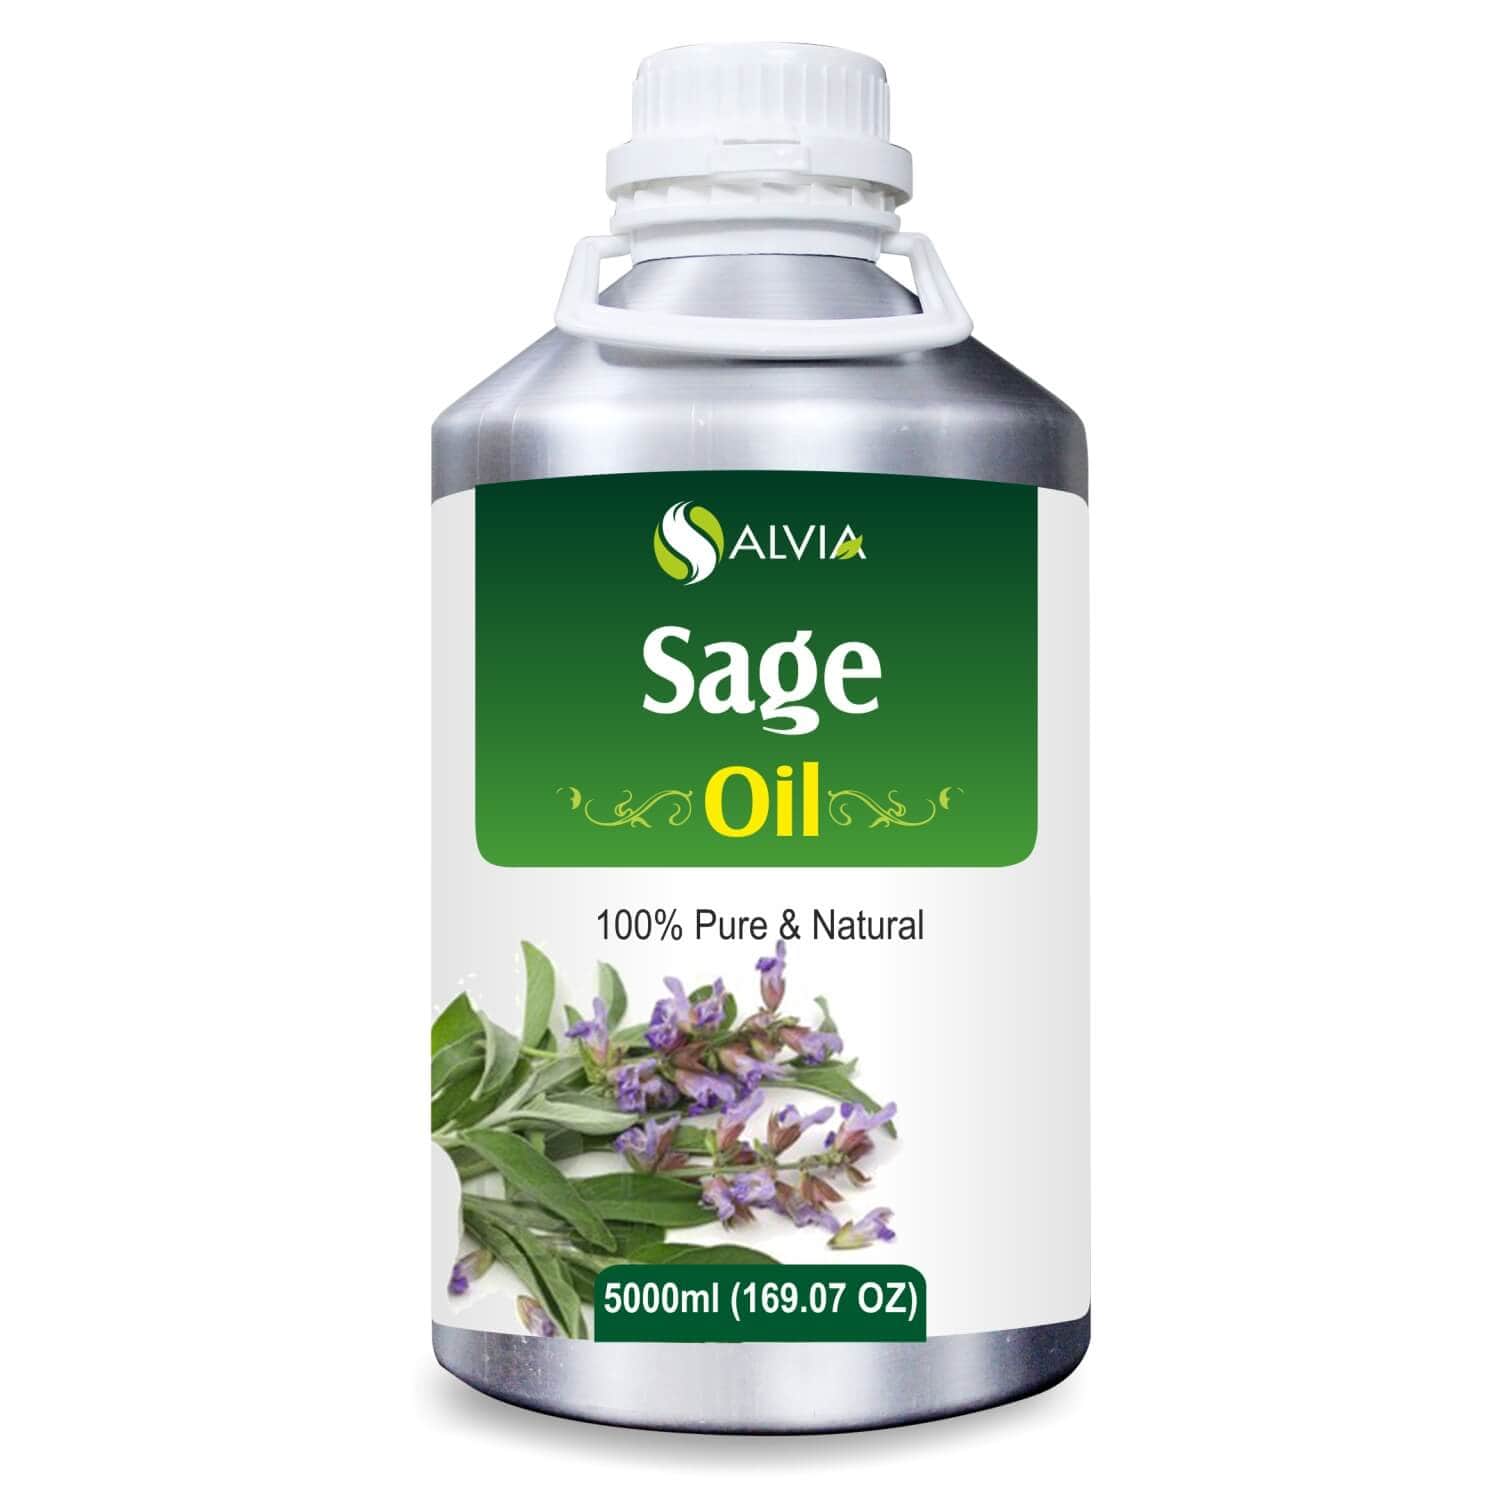 Salvia Natural Essential Oils 5000ml Sage Oil (Salvia Officnalis) Pure Essential Oil Pure Undiluted Therapeutic Grade Reduces Wrinkles, Soothes Skin Redness & Irritation, Eliminates Dandruff & More